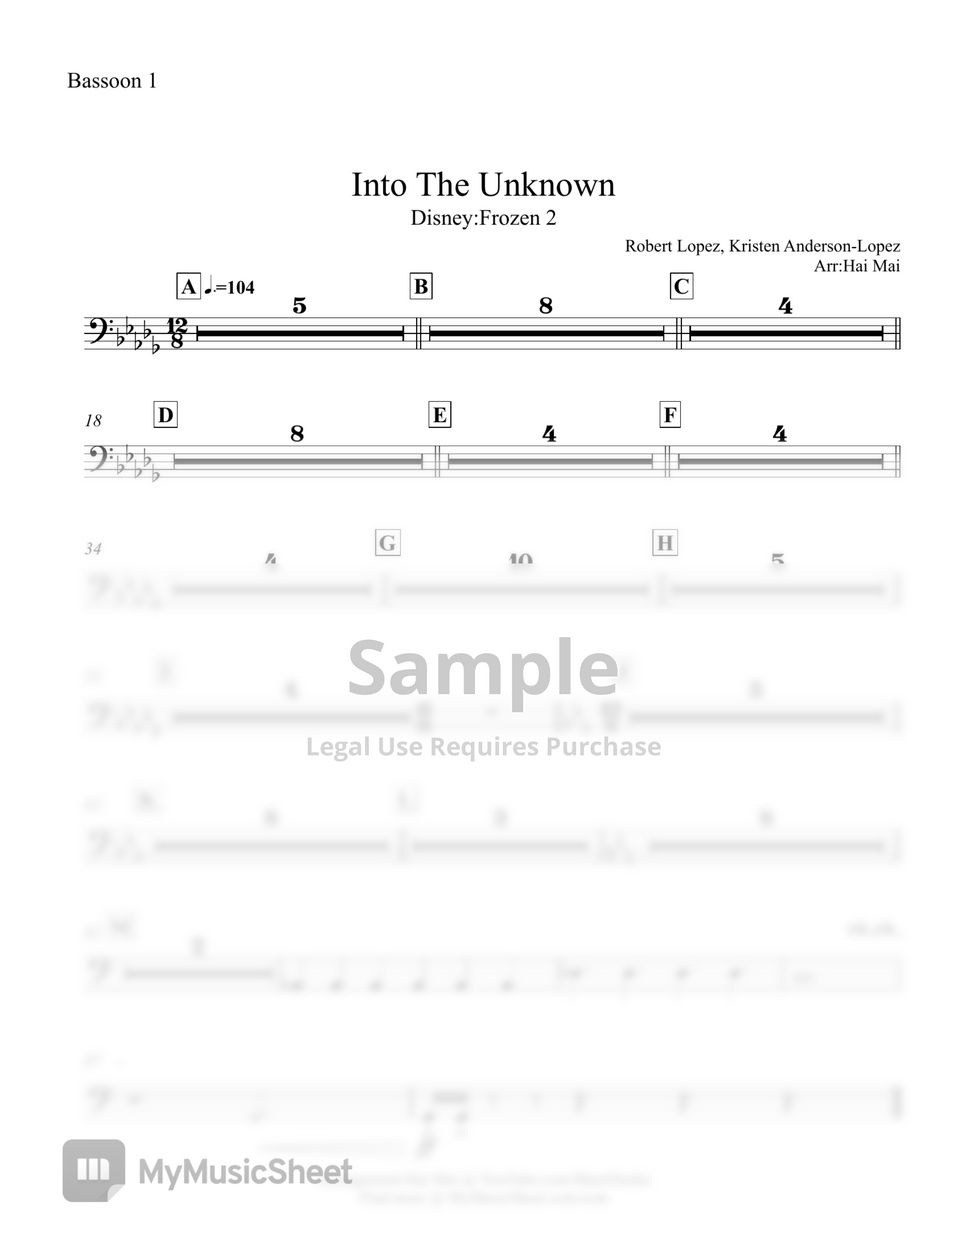 Kristen Anderson-Lopez, Robert Lopez - Into The Unknown(Disney:Frozen 2) for Violin solo and Orchestra - Set of Part by Hai Mai